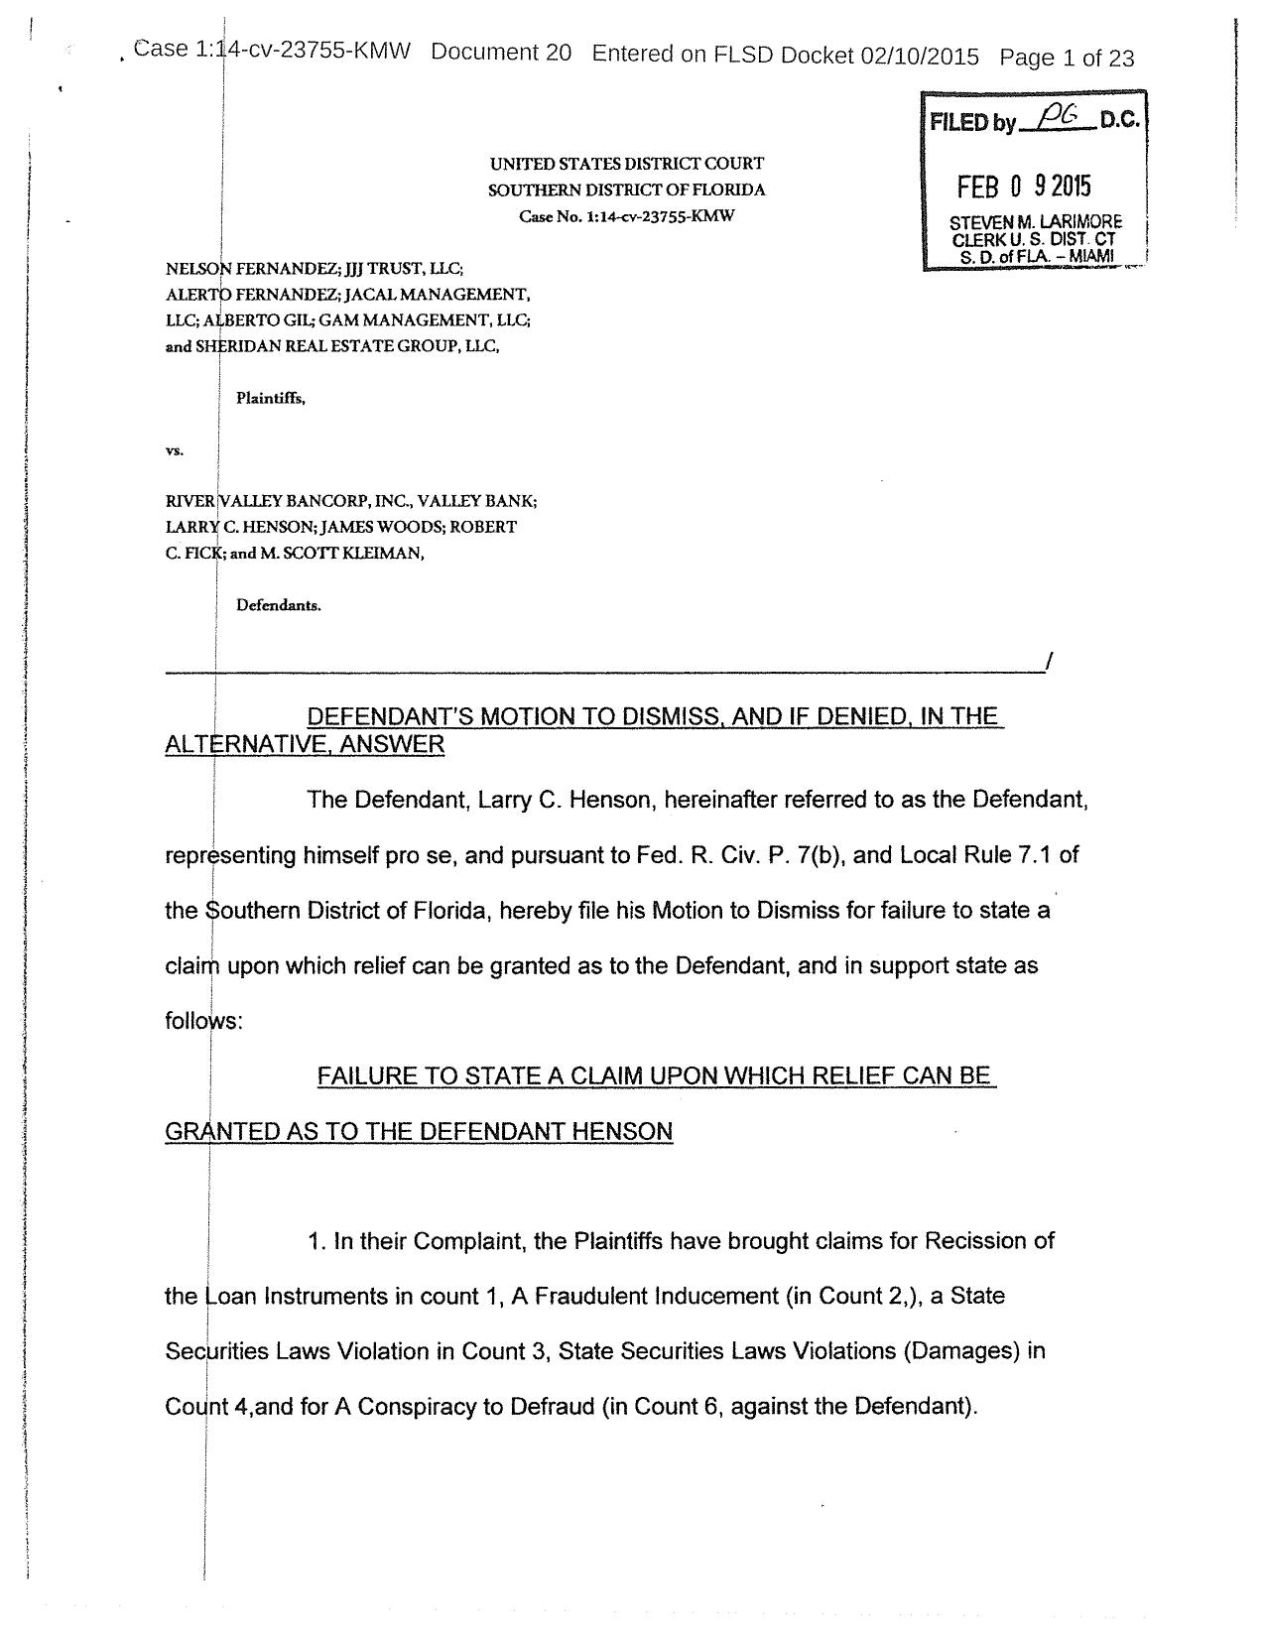 defendant motion to dismiss template